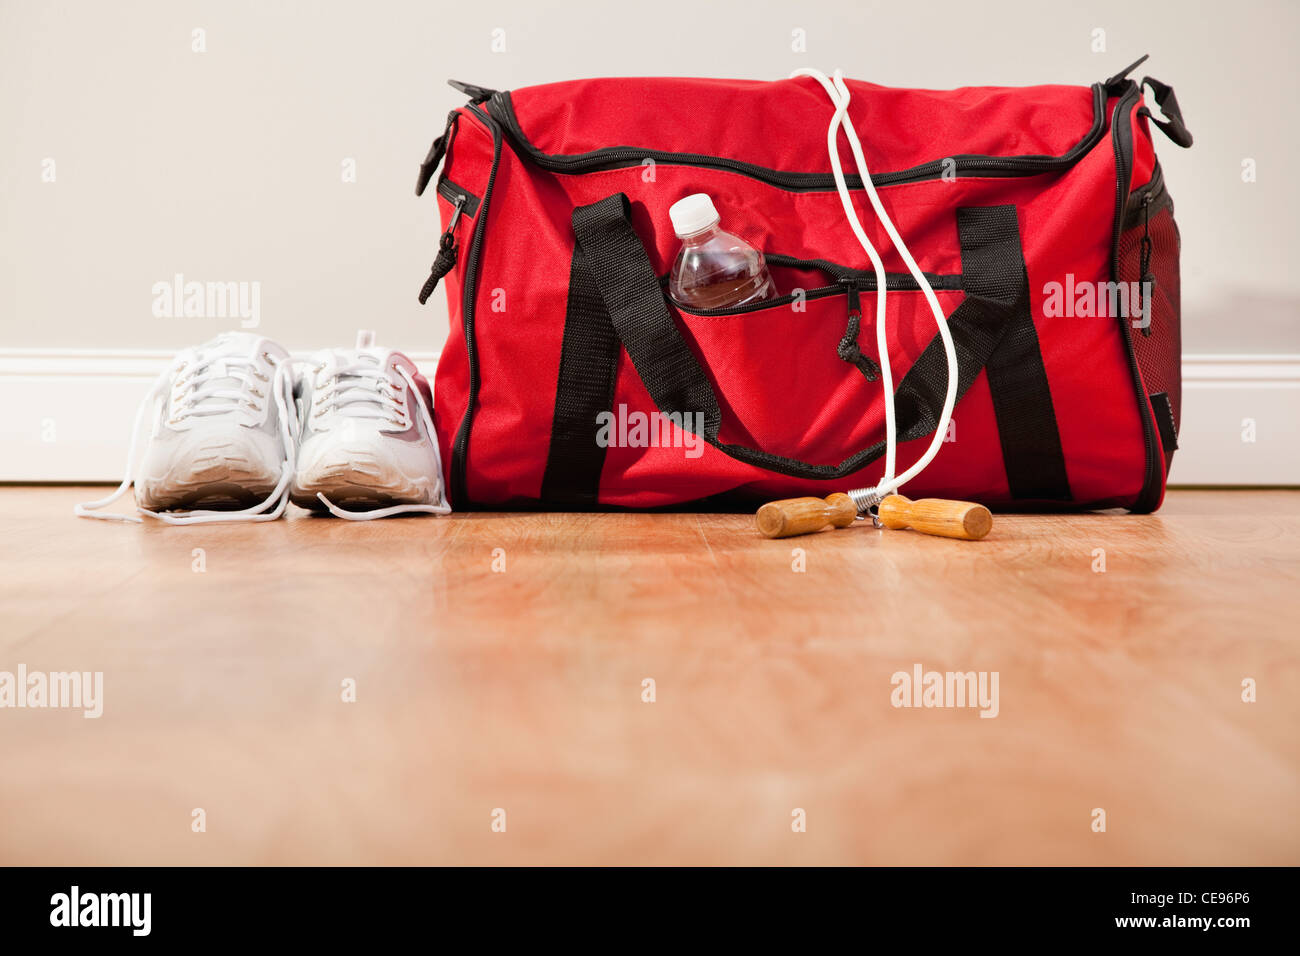 Bag and trainers Stock Photo